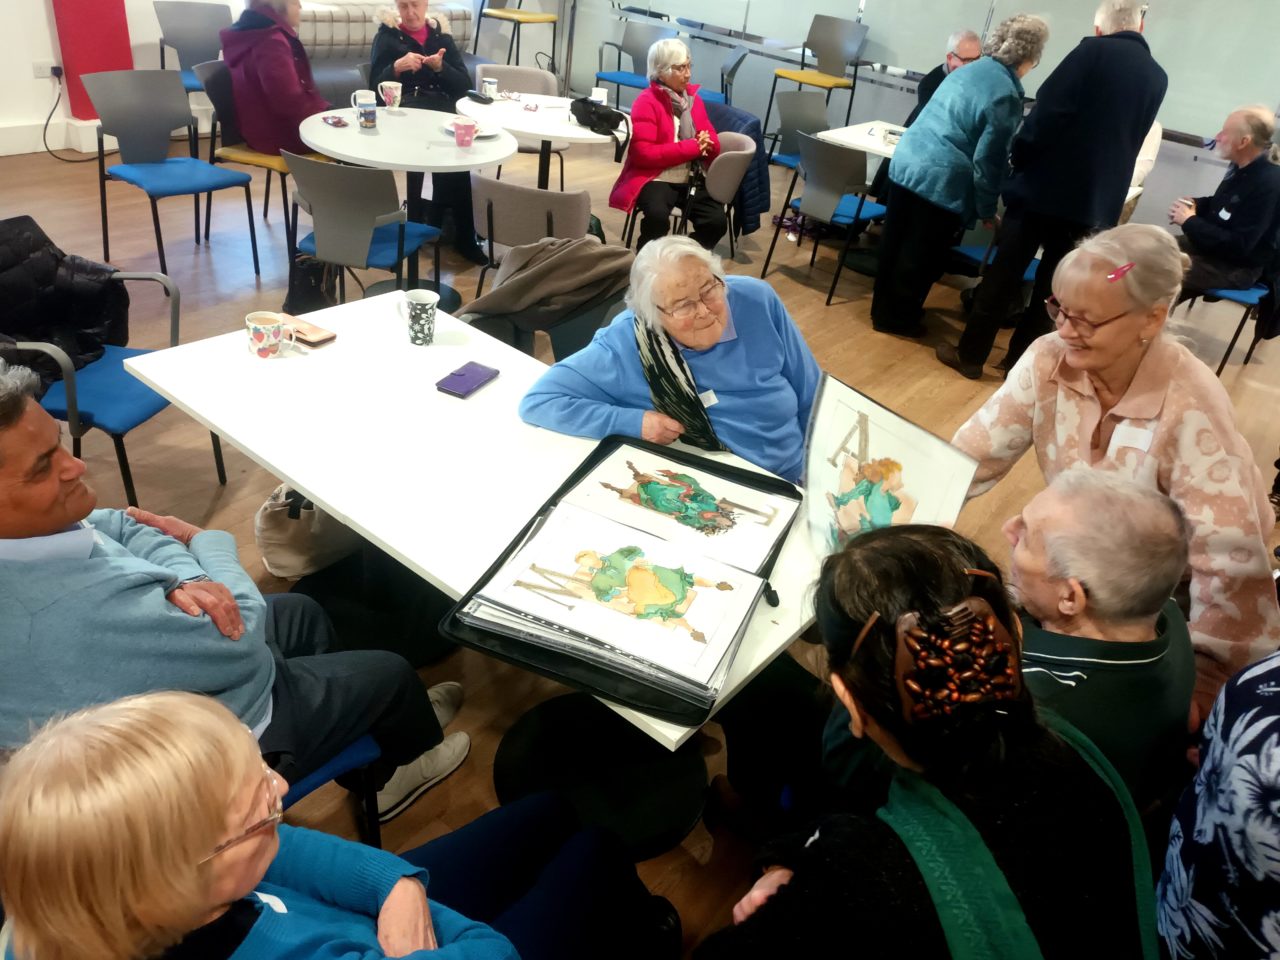 A group of elderly individuals engaging in a social activity in a brightly lit room, with some seated around tables and others standing, while one person showcases artwork in a portfolio for others to view.